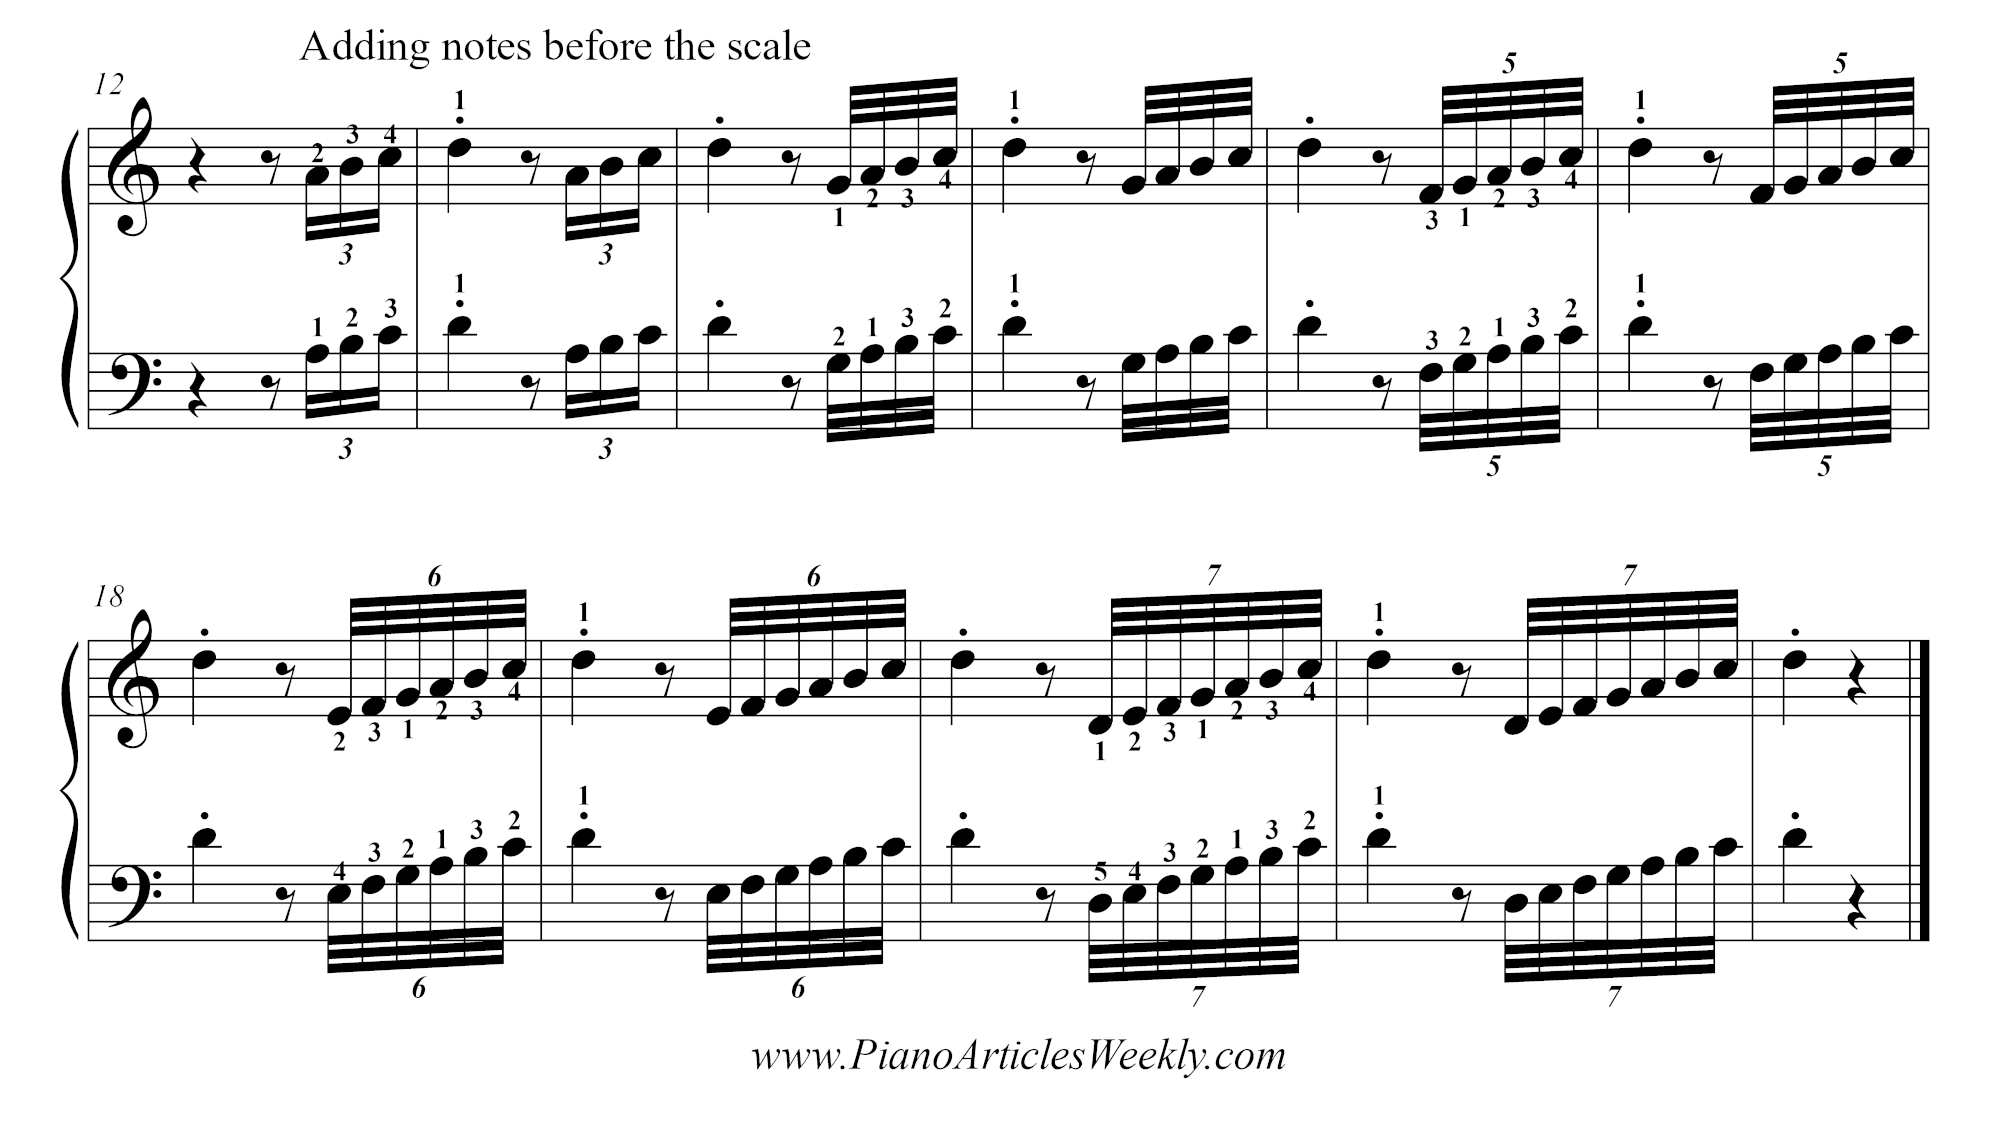 D major piano scale - advanced exercise note addition before the scale